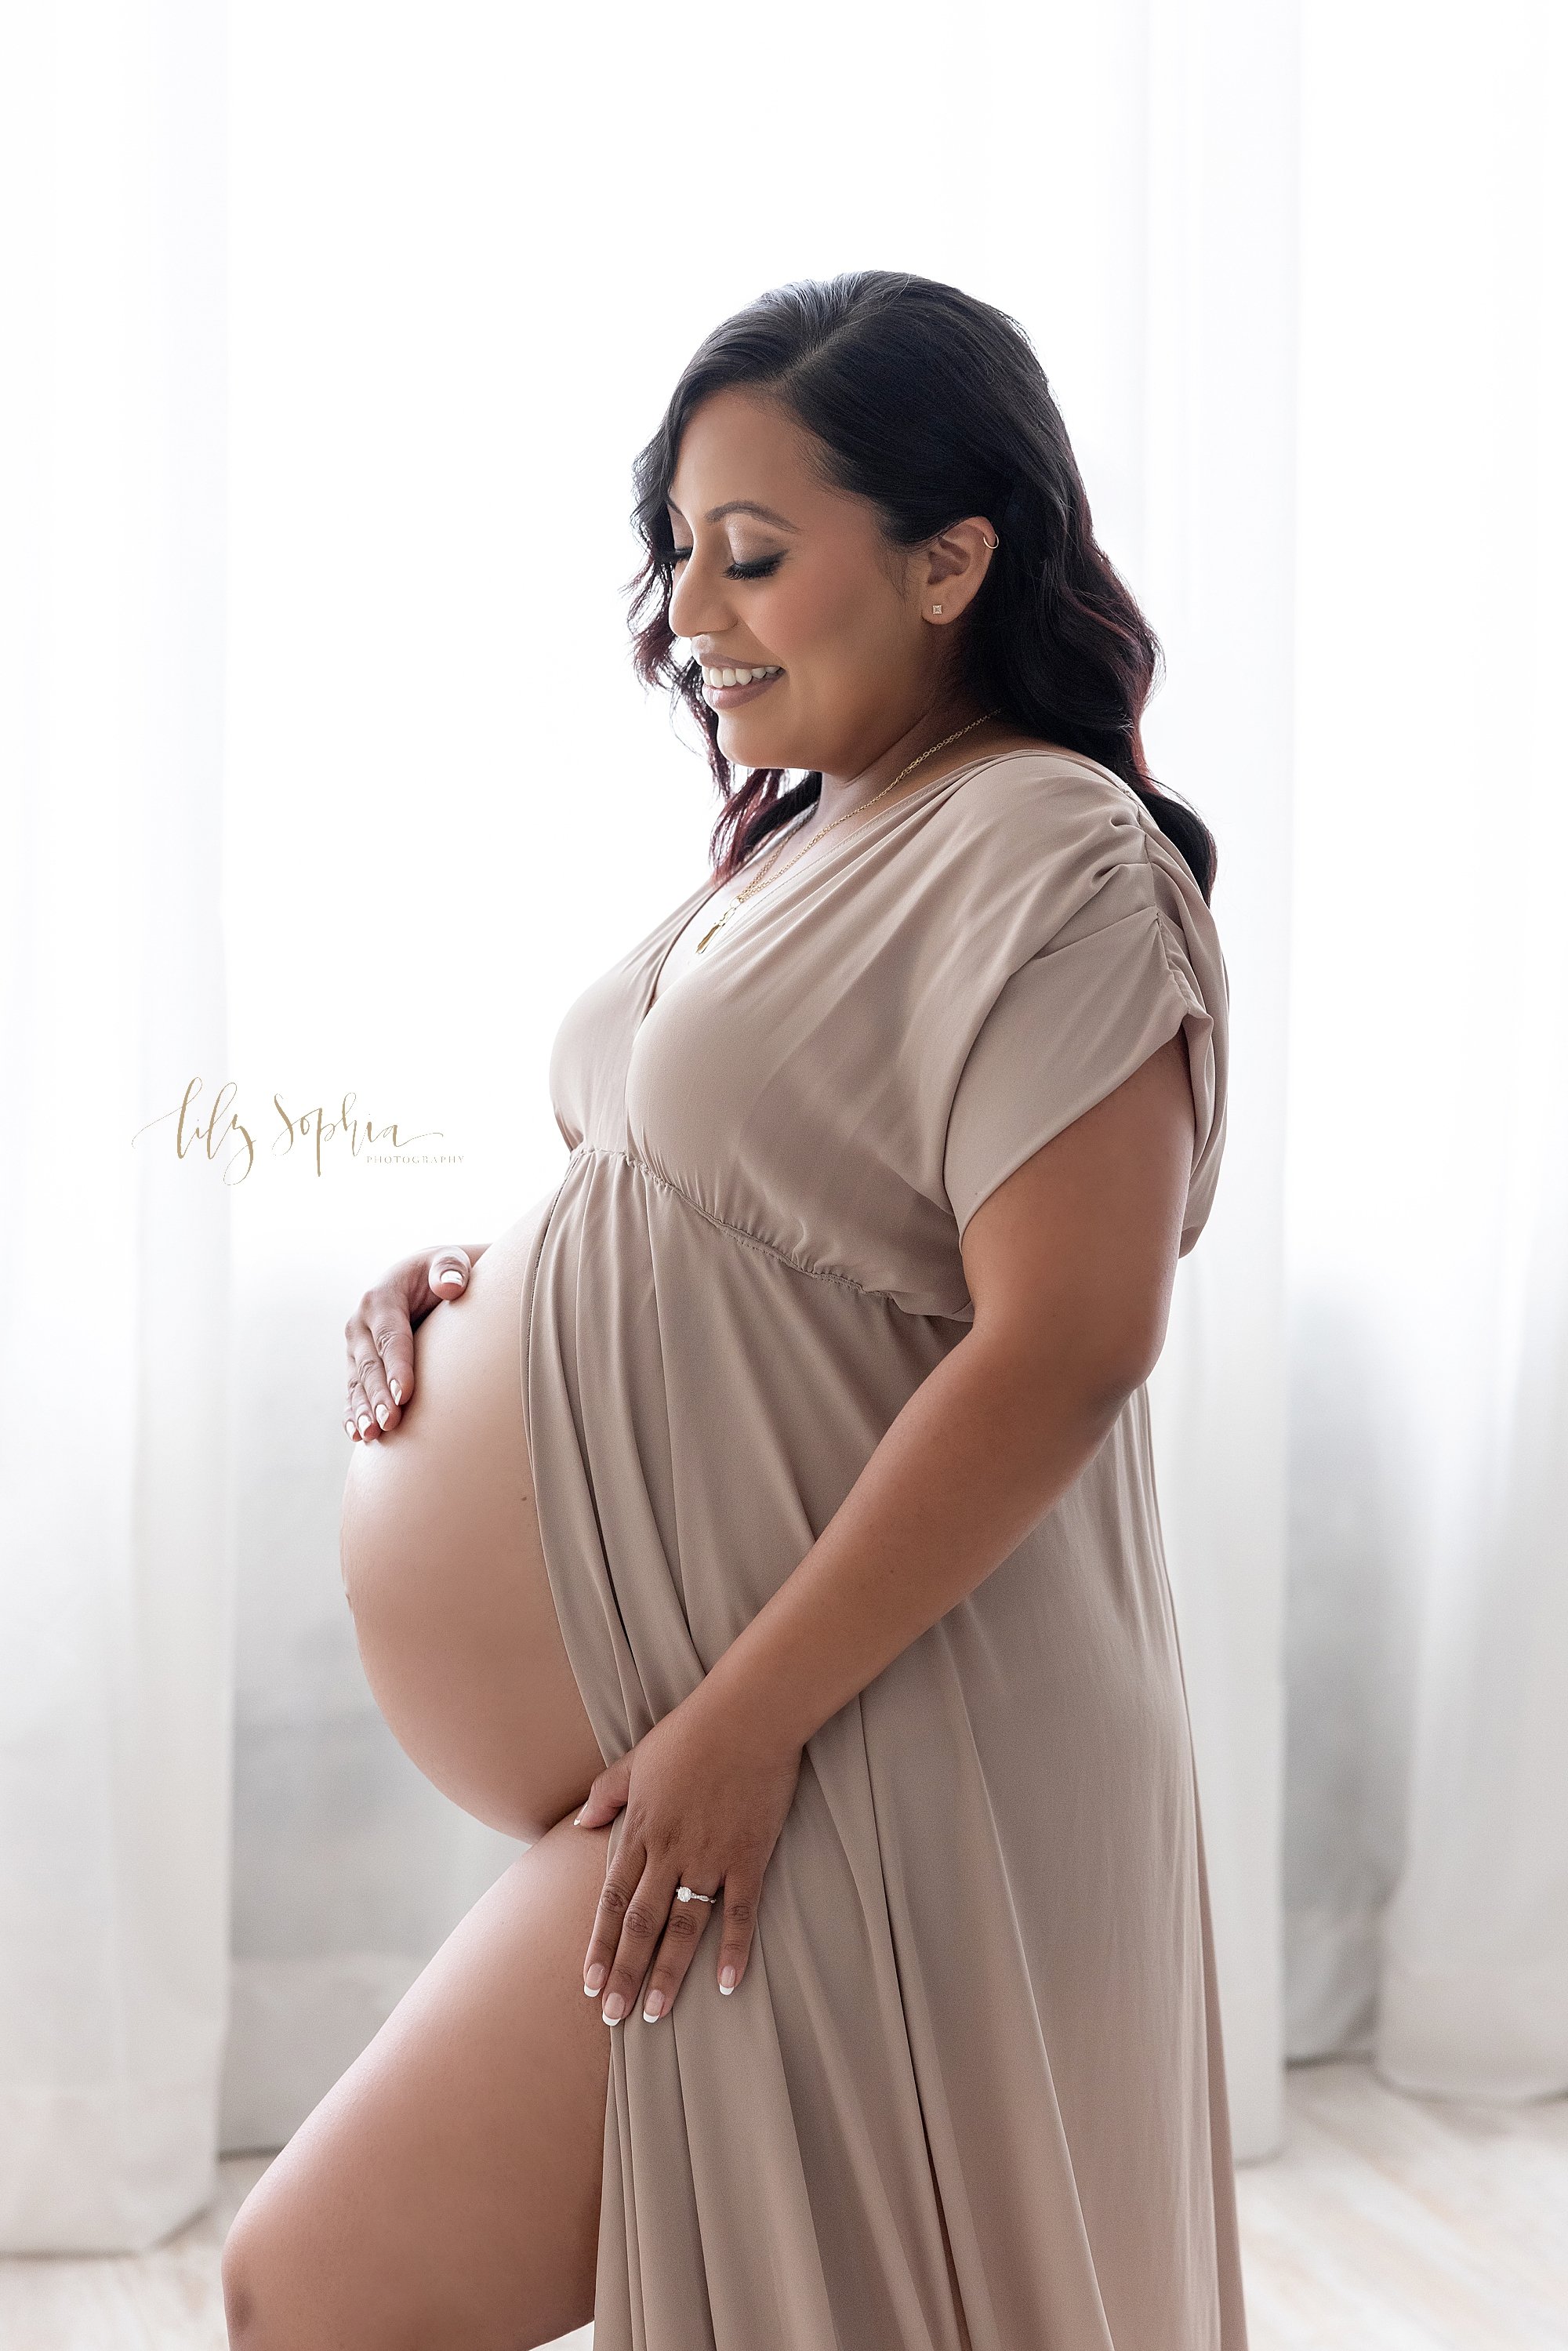  Maternity portrait of a pregnant mother standing in front of a window streaming natural light with her split front gown baring her belly as she places her right hand on her bare belly and her left hand on her gown to bare her right leg as she contem